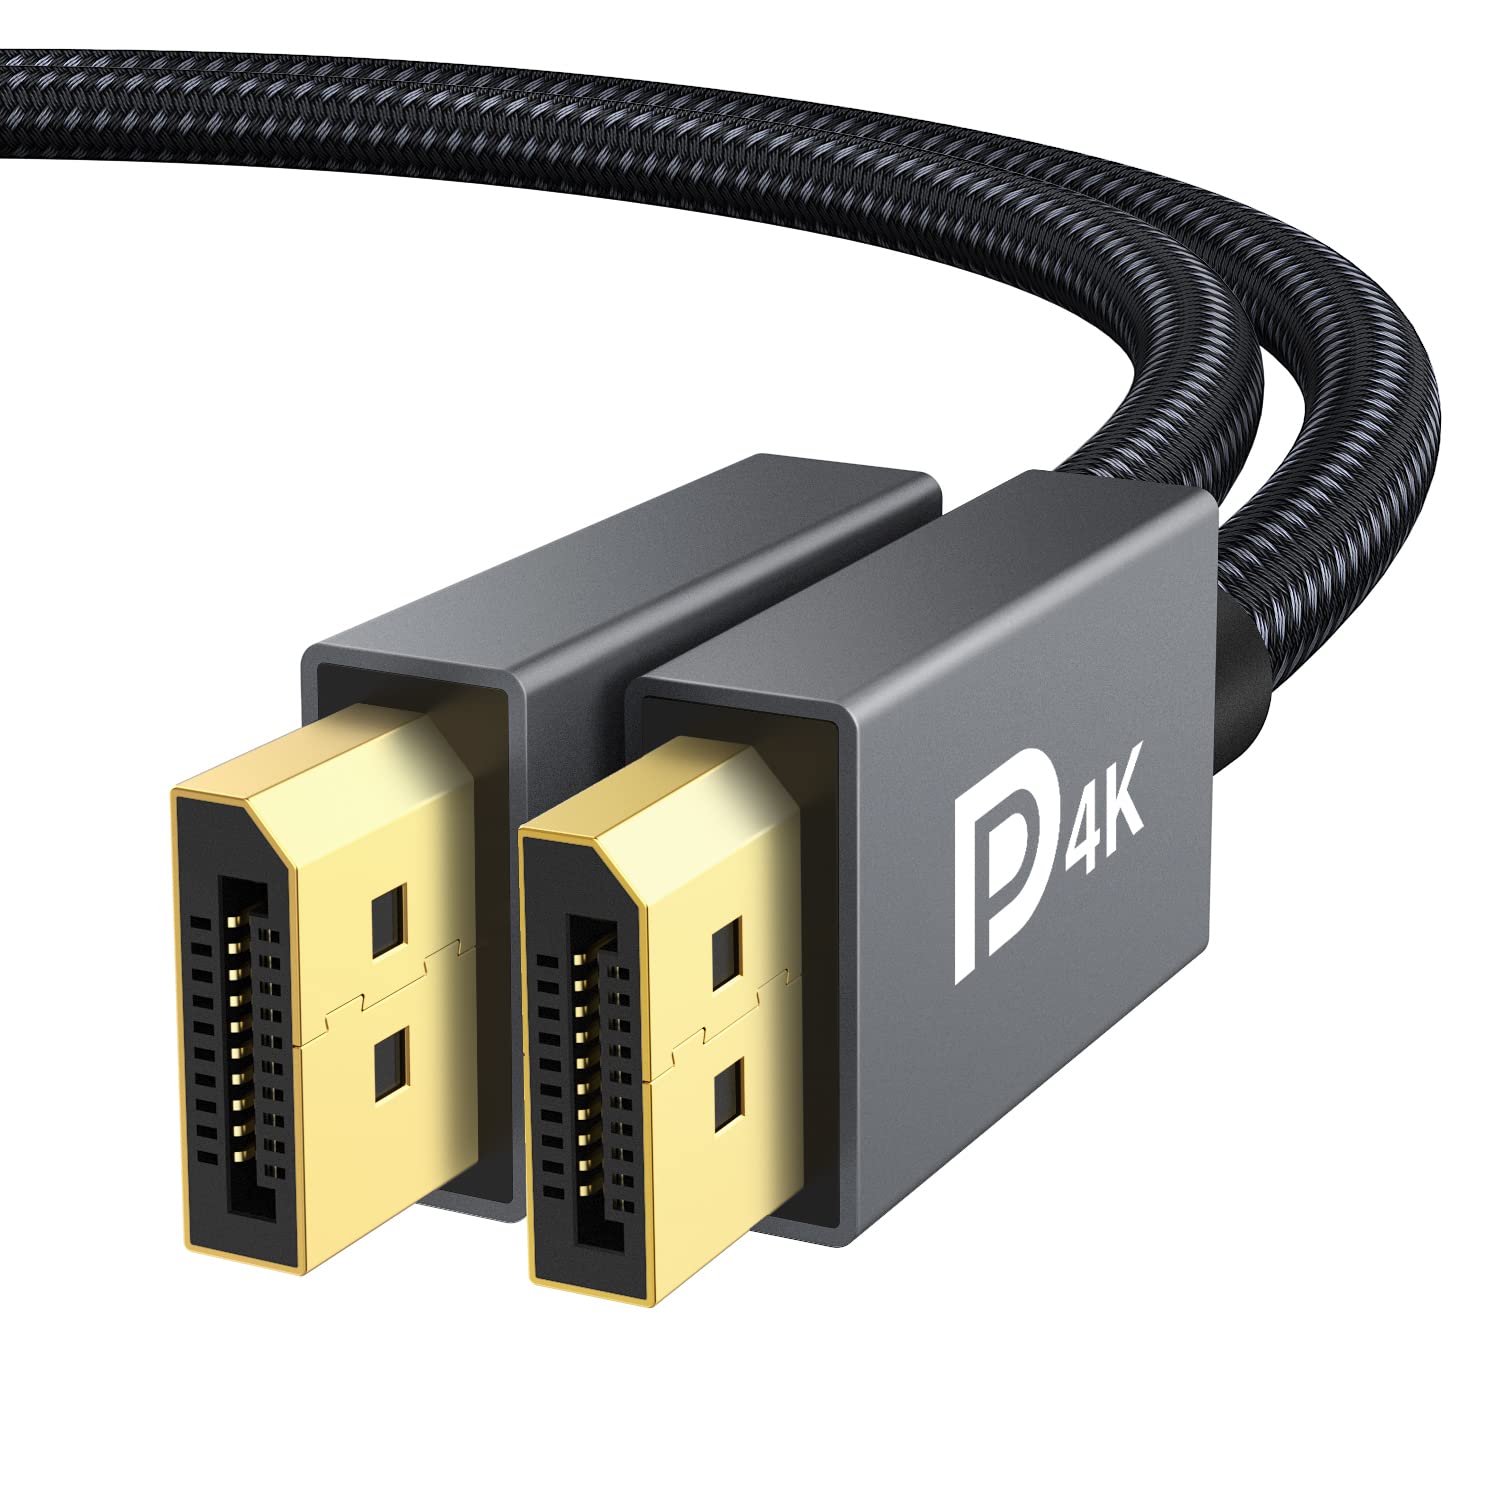 Inspect the cables for any signs of damage or loose connections.
If using an HDMI or DisplayPort cable, try using a different cable to rule out a faulty cable.